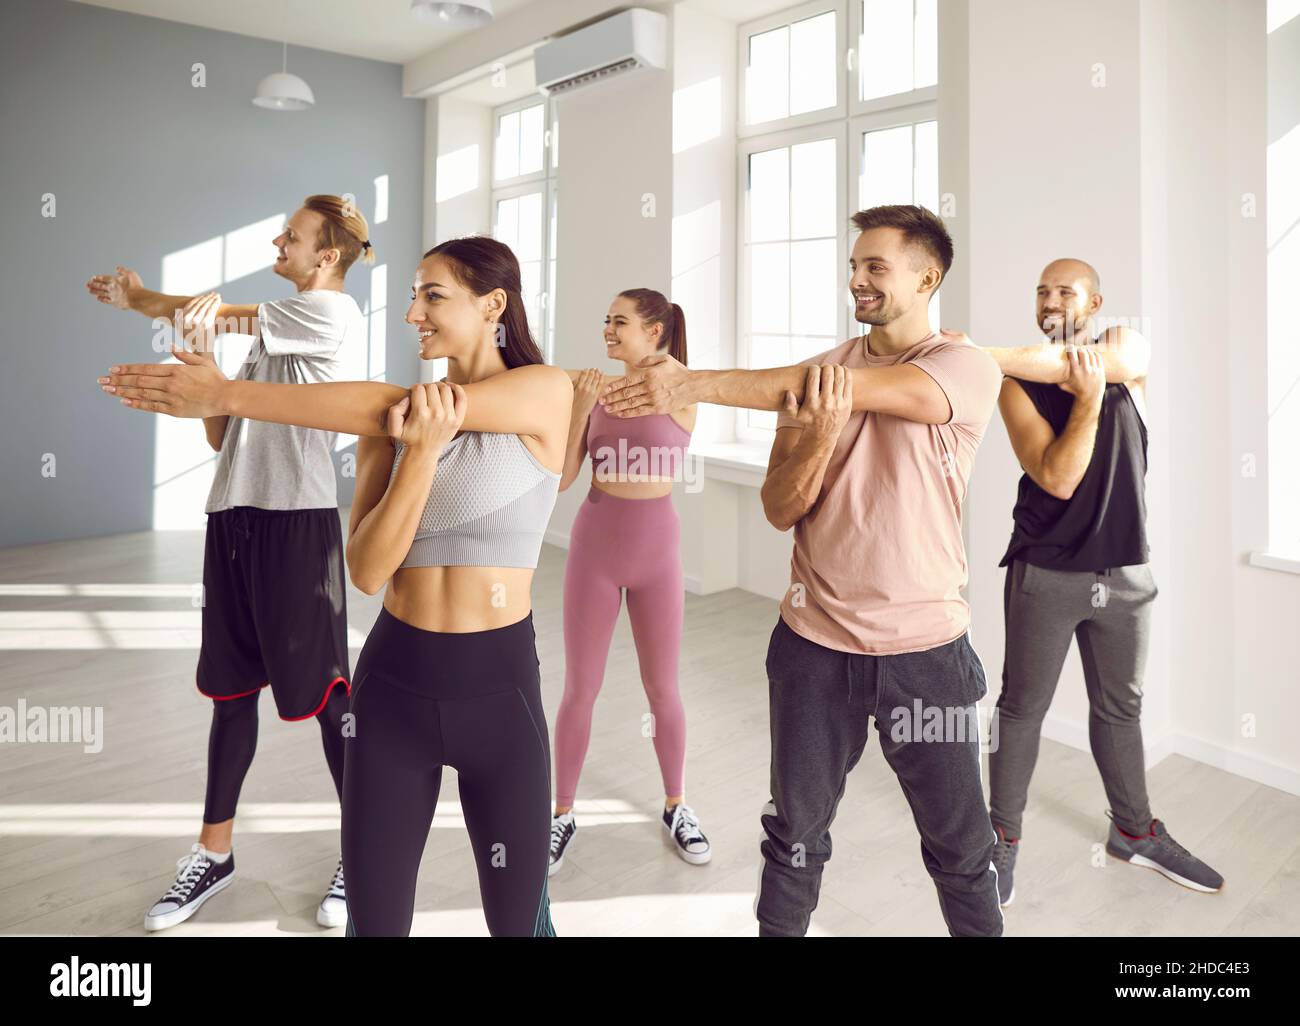 Woman exercising with arms up - Stock Image - F007/9404 - Science